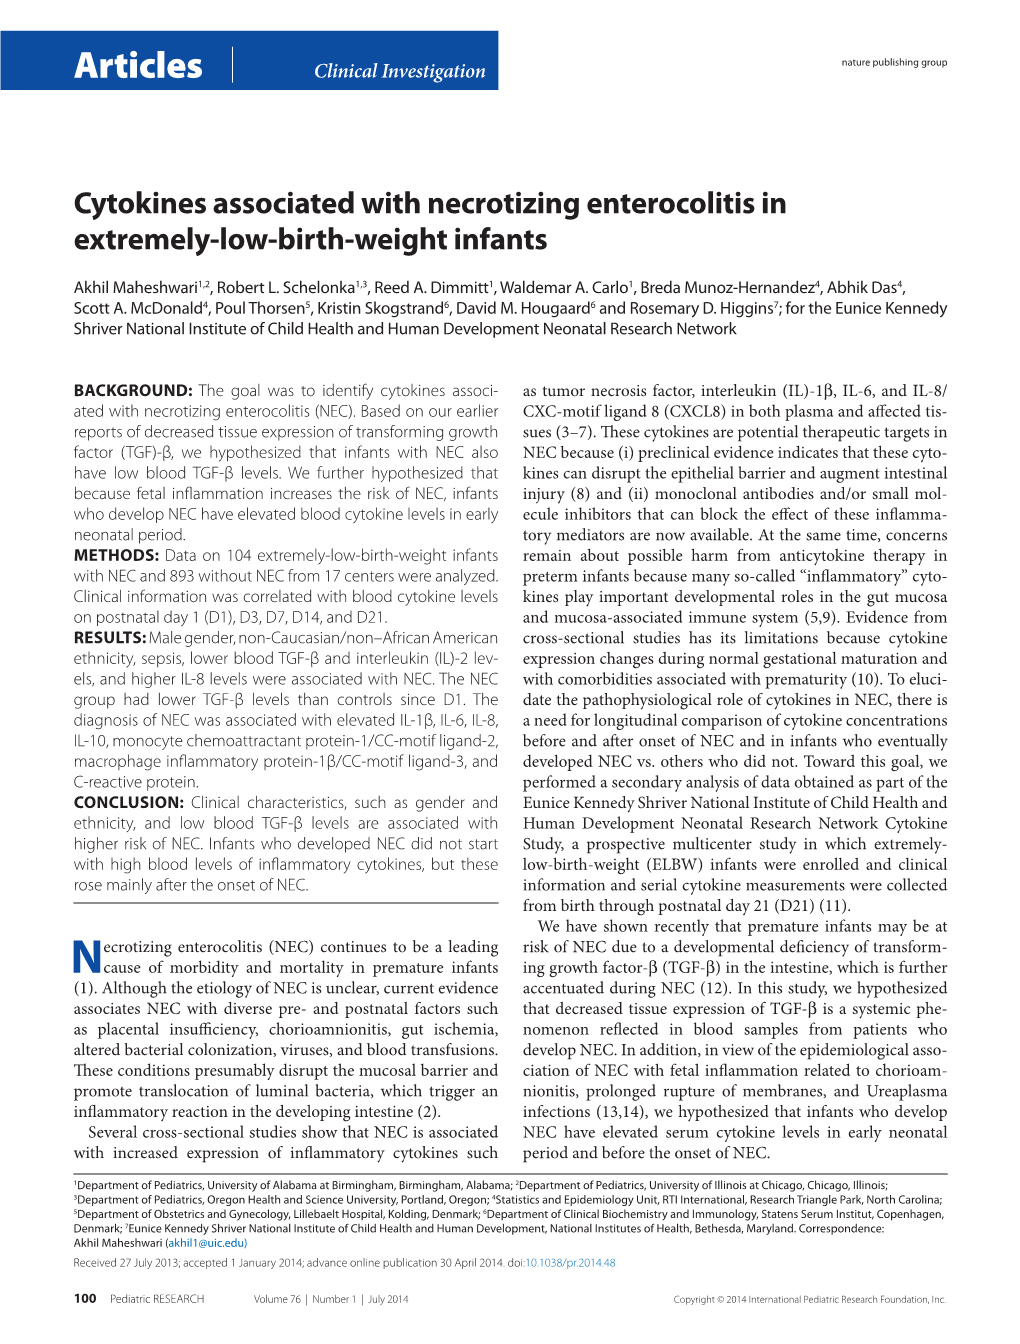 Cytokines Associated with Necrotizing Enterocolitis in Extremely-Low-Birth-Weight Infants